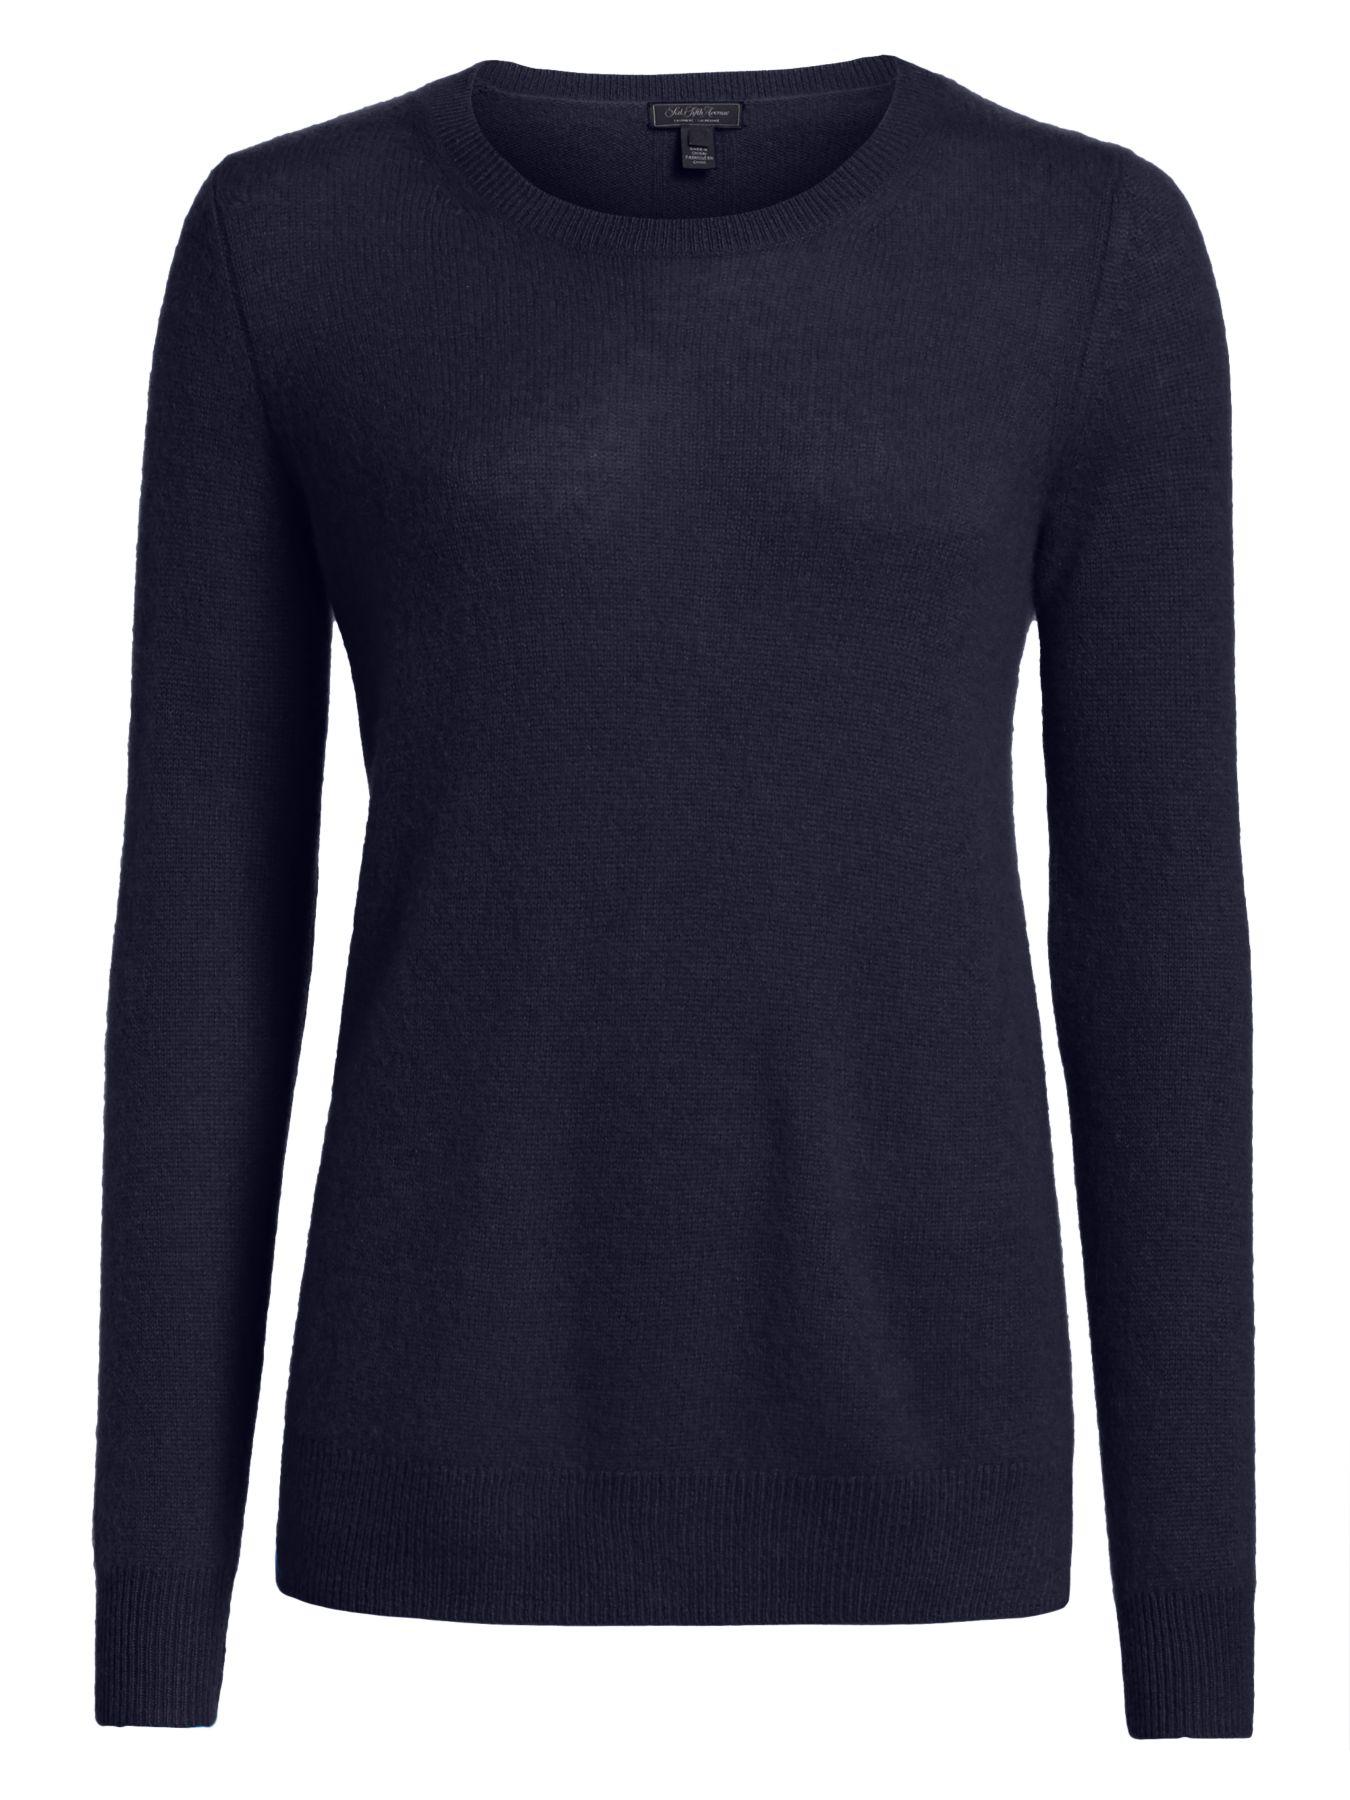 Saks Fifth Avenue Collection Featherweight Cashmere Sweater in Blue - Lyst